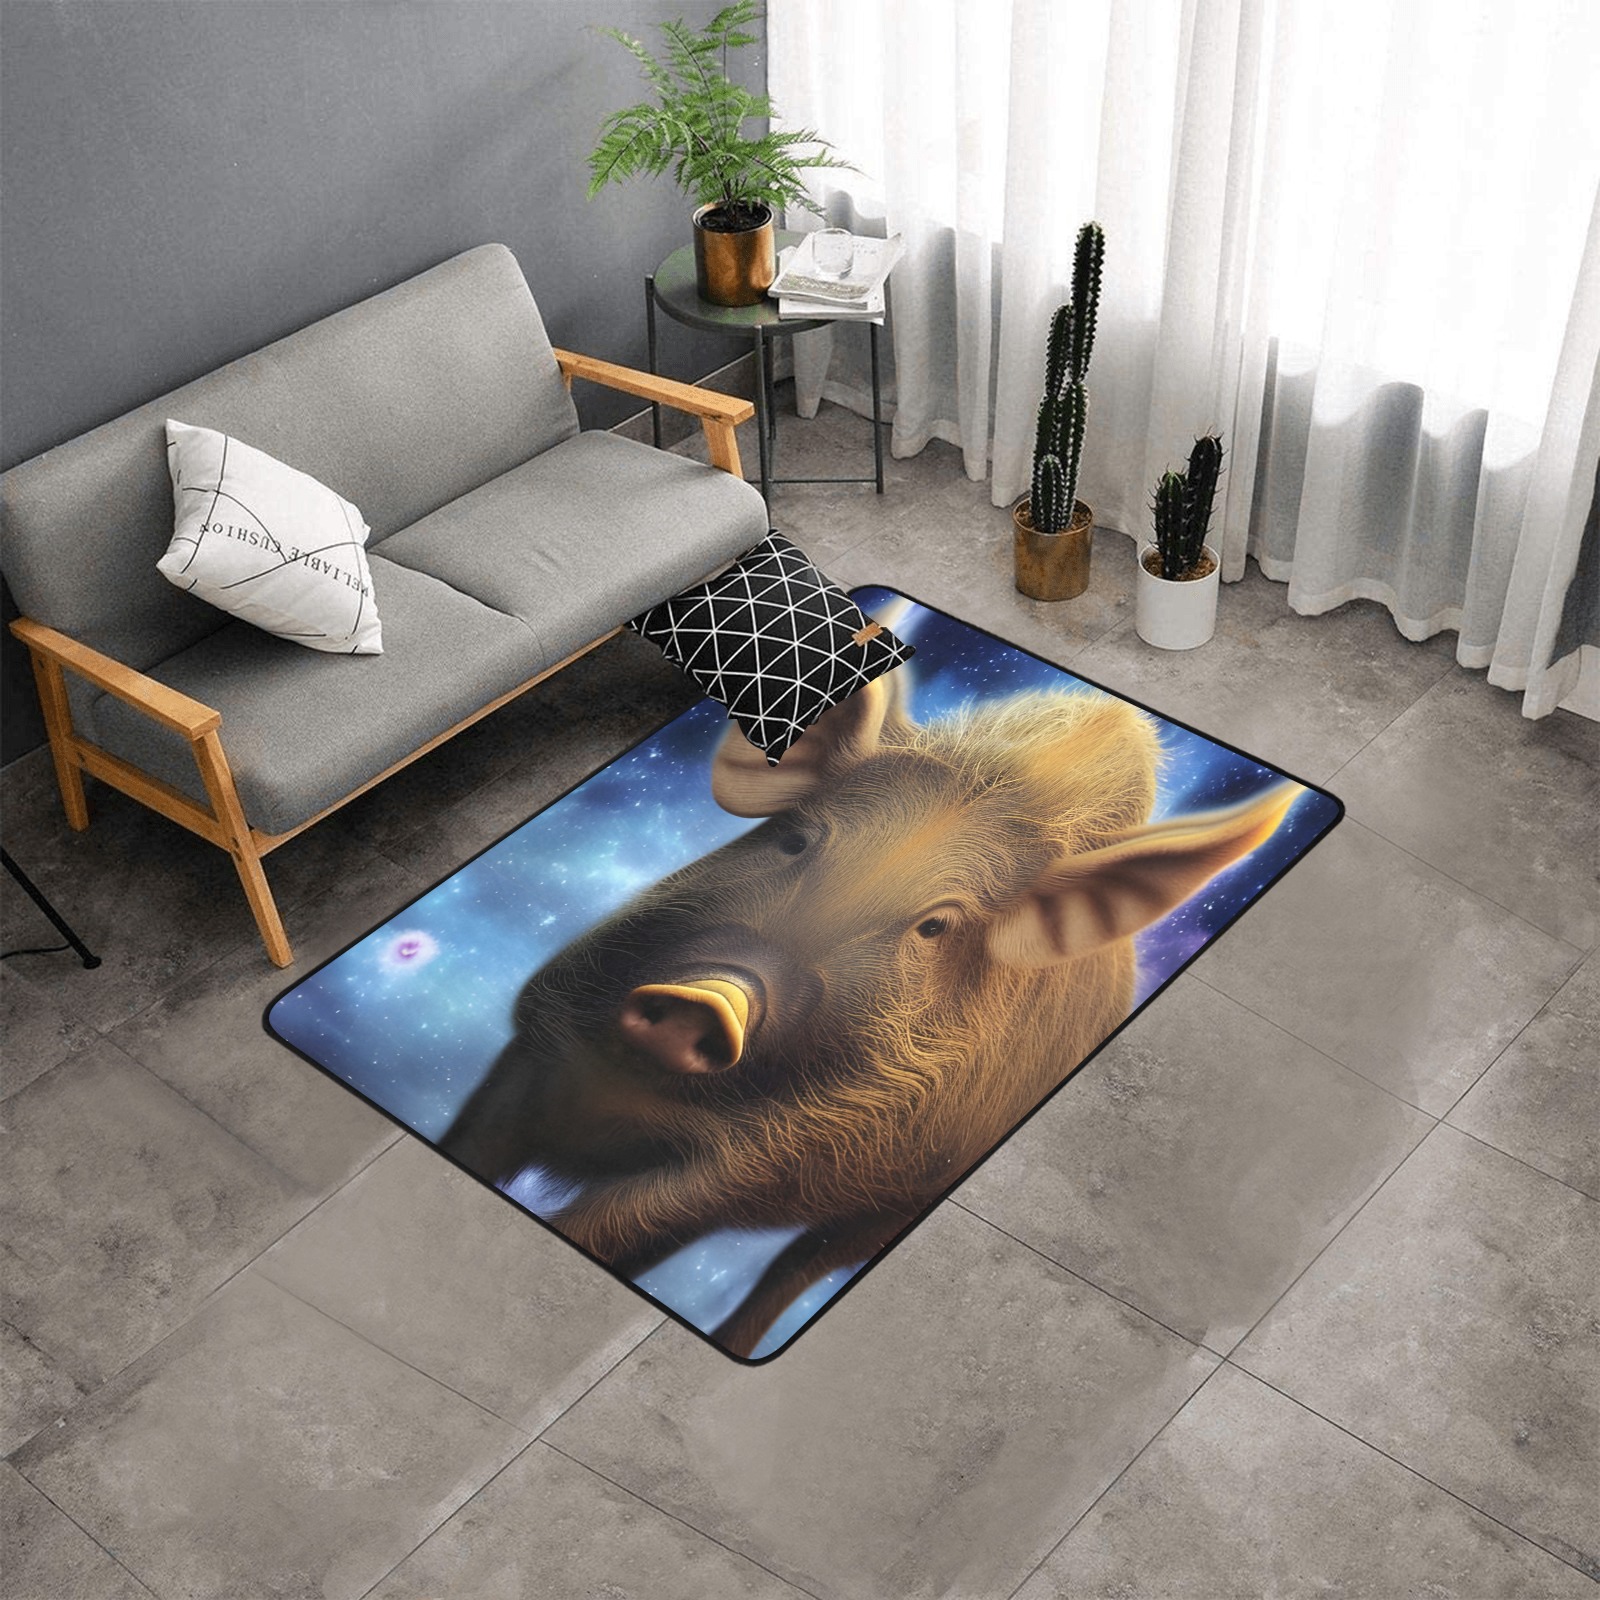 The Boar Area Rug with Black Binding 5'3''x4'